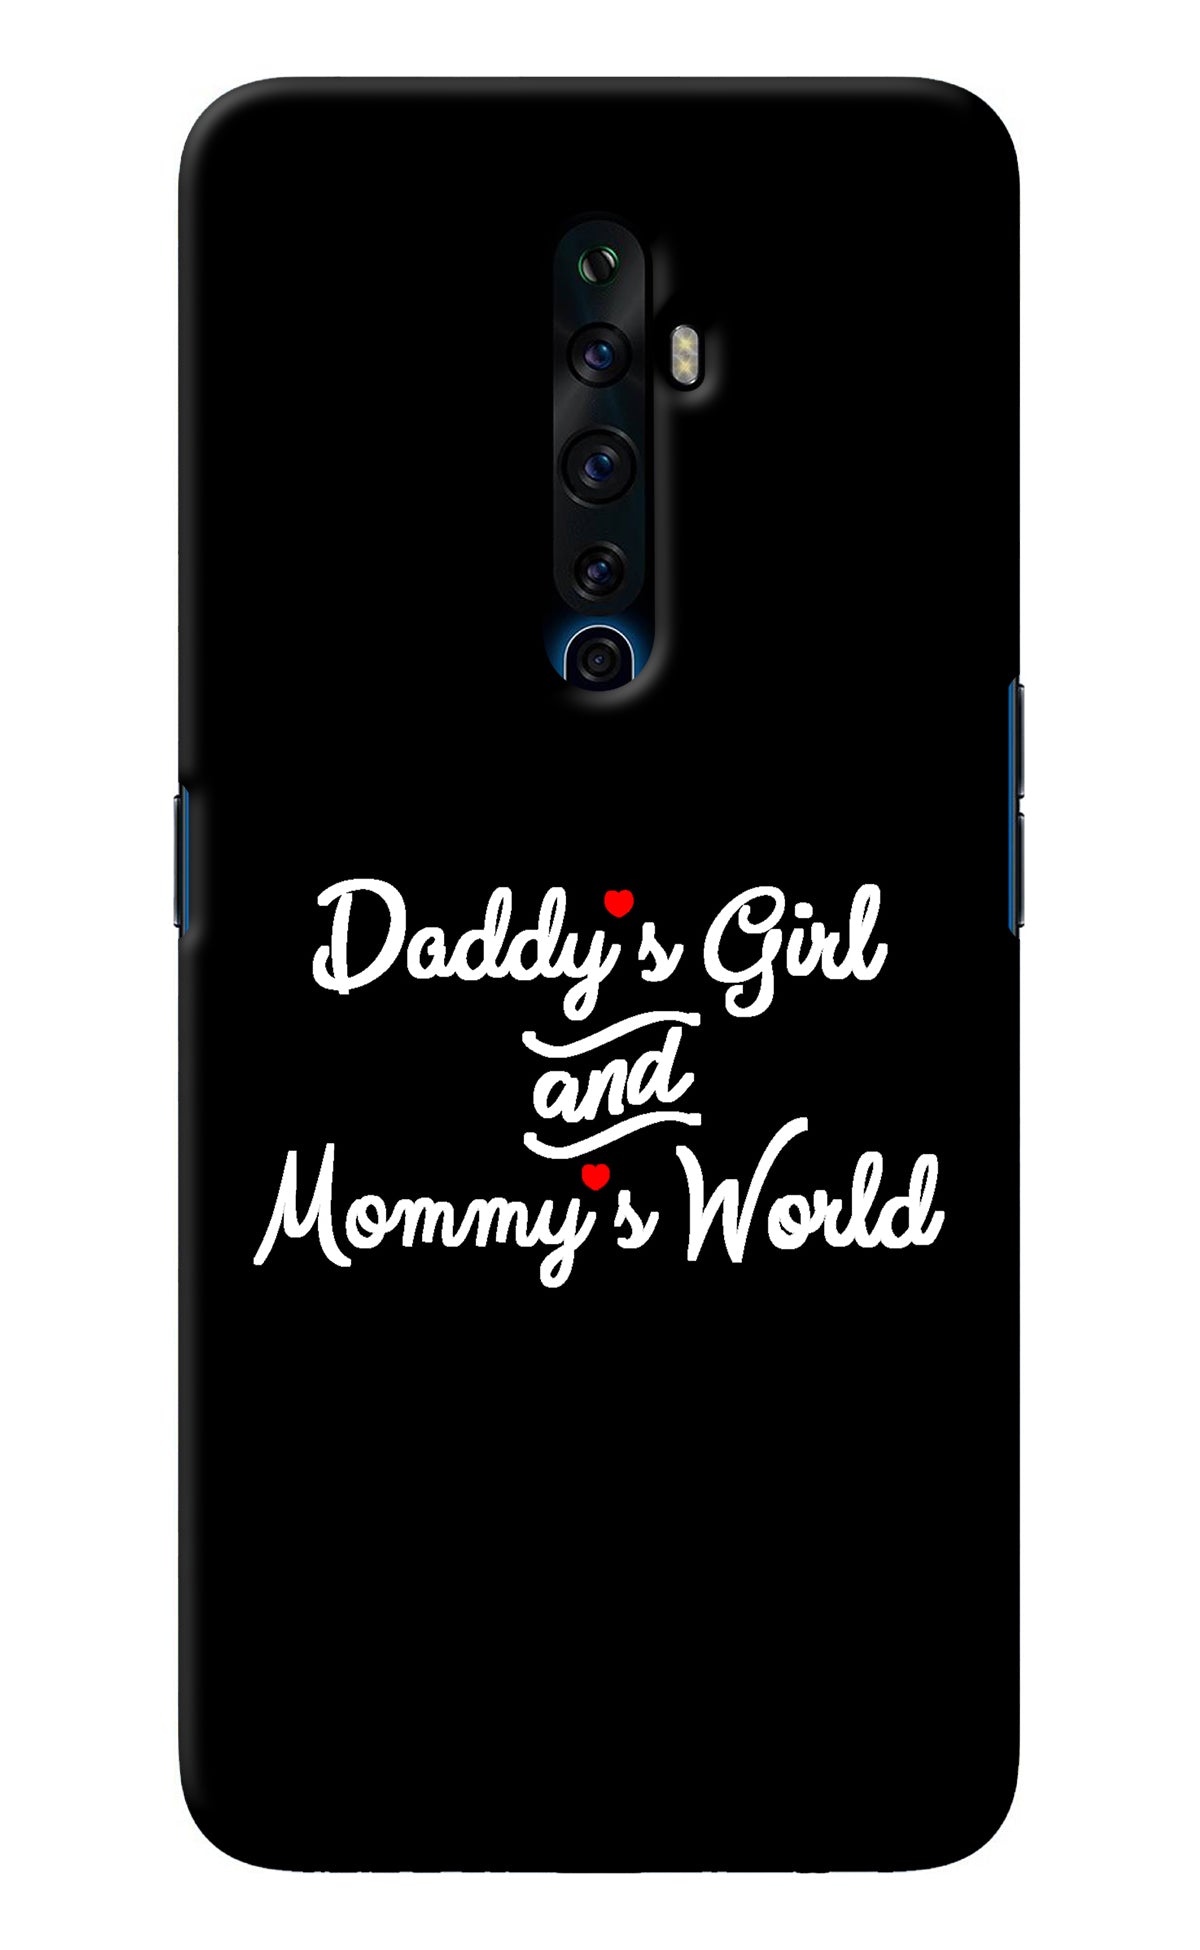 Daddy's Girl and Mommy's World Oppo Reno2 Z Back Cover